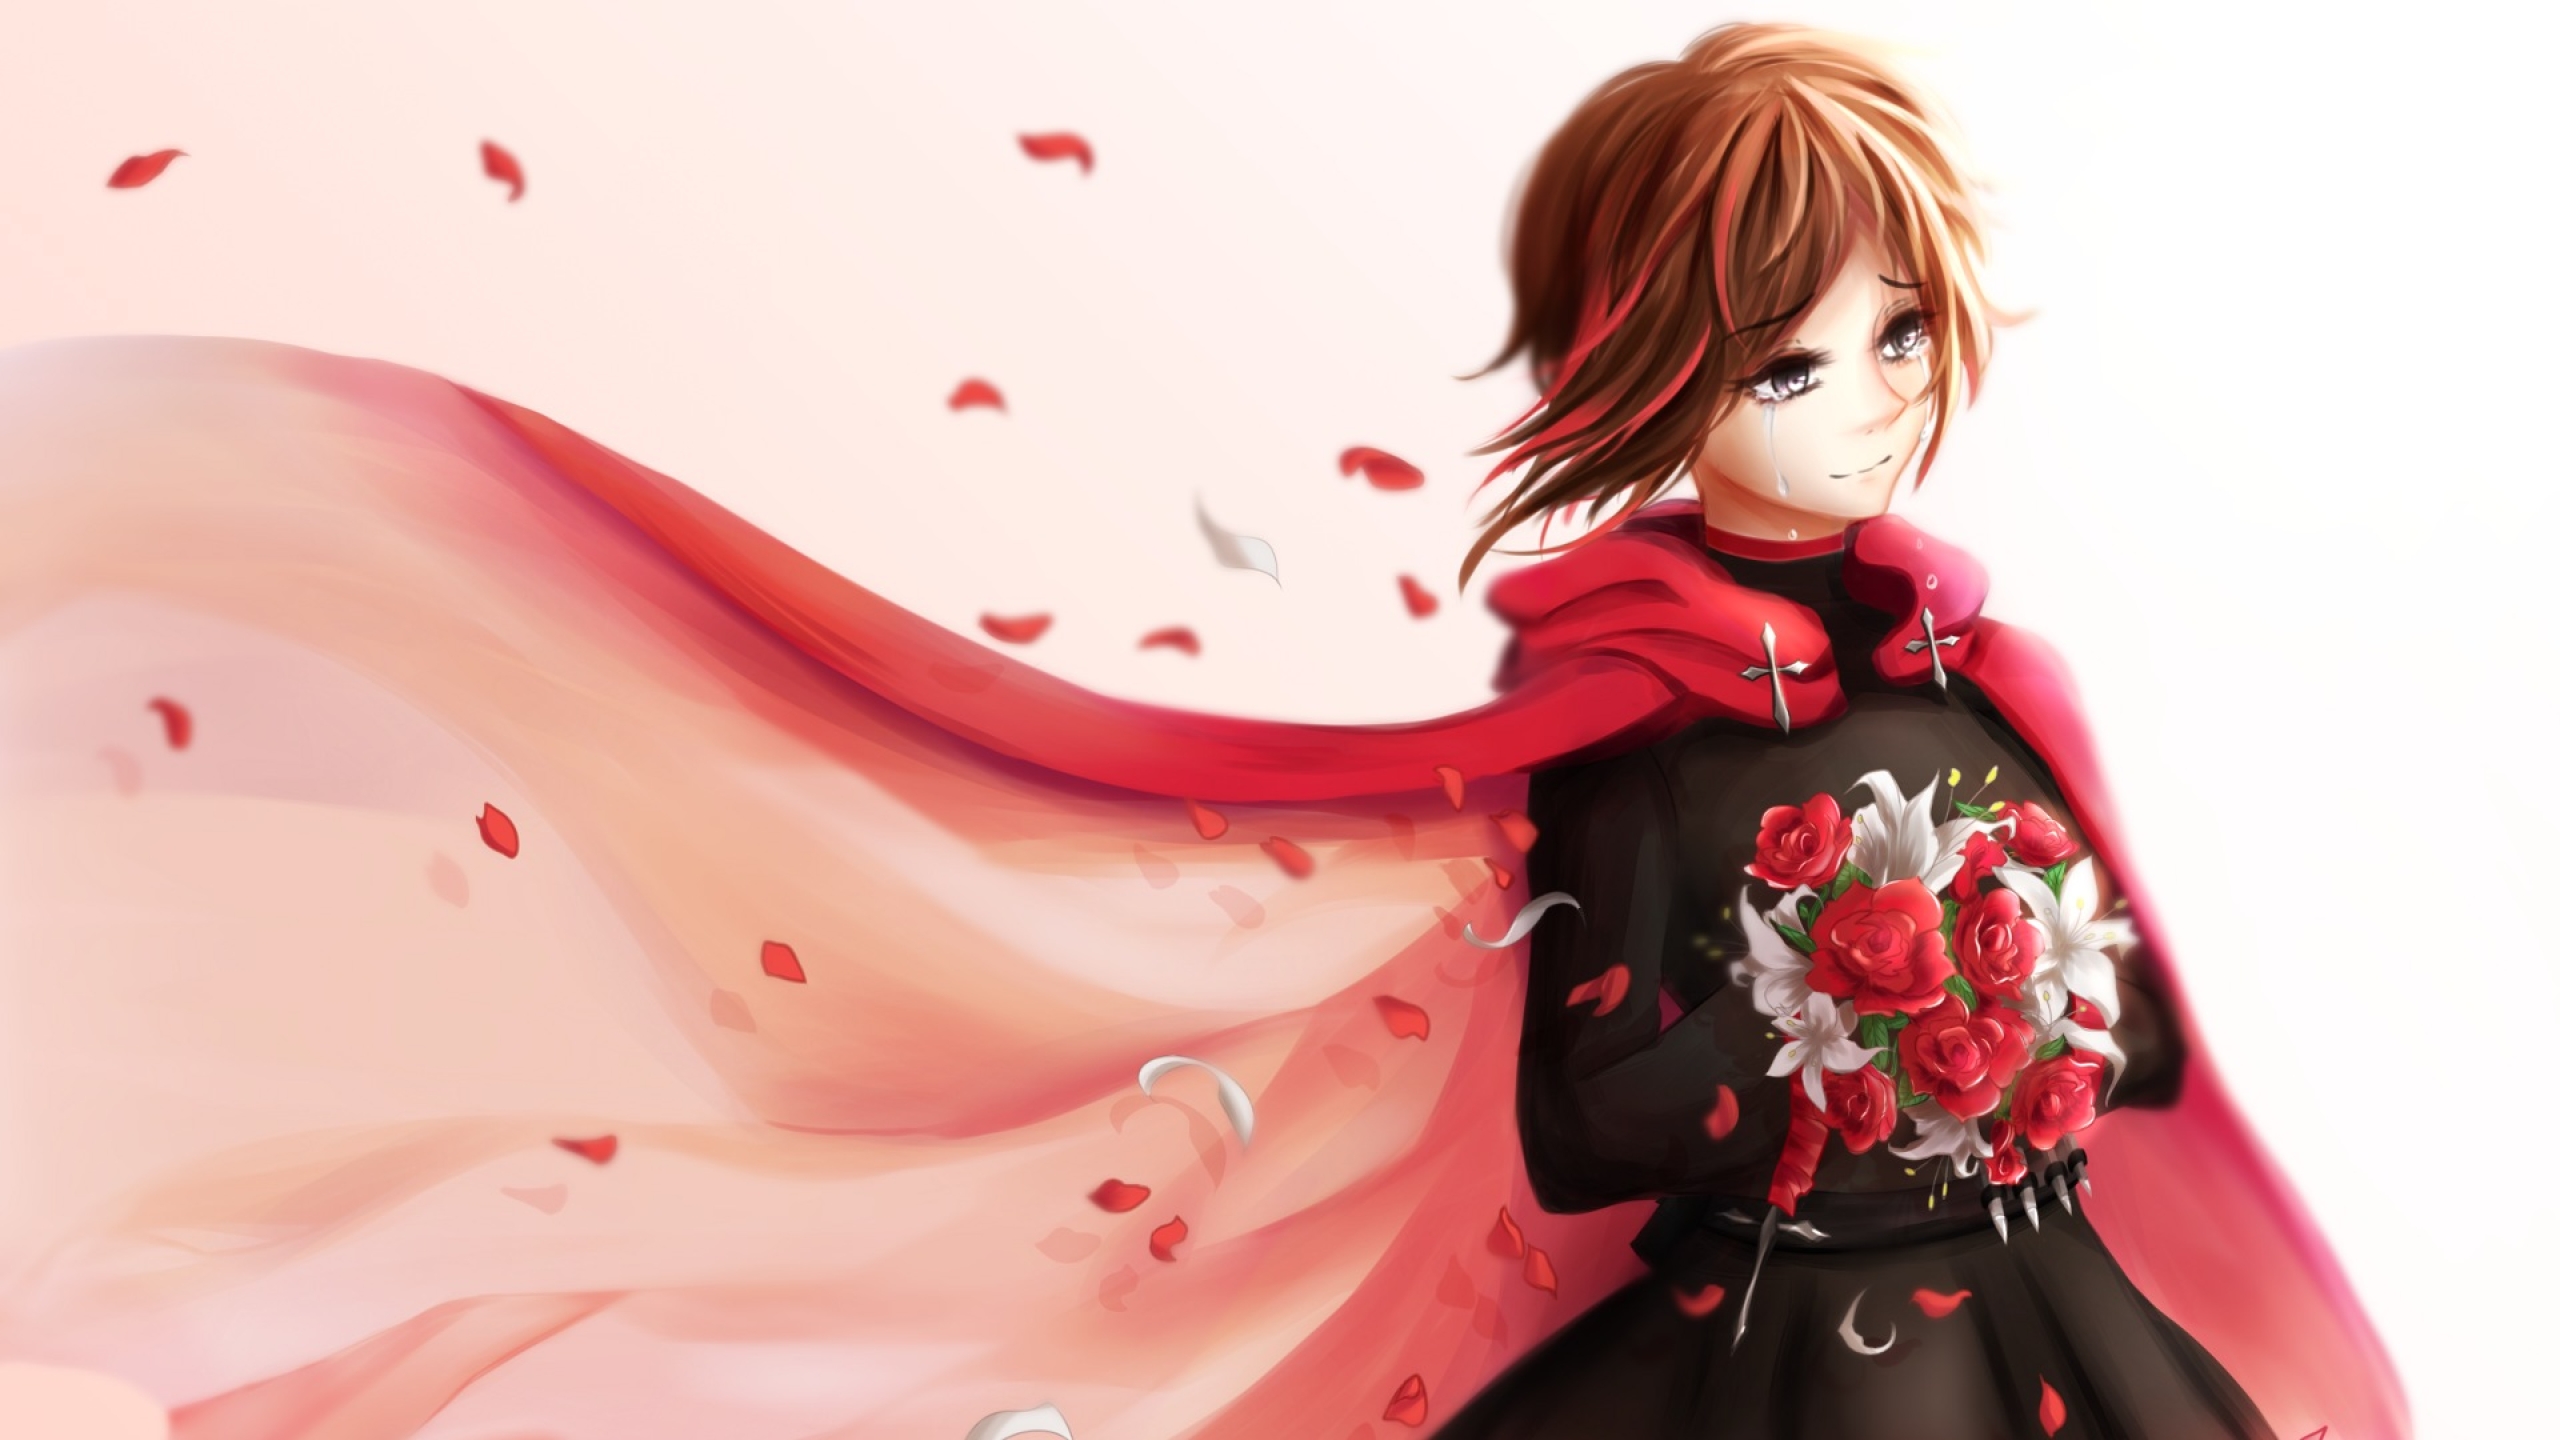 2560x1440 Rwby Ruby Rose Anime 1440p Resolution Wallpaper Hd Anime 4k Wallpapers Images Photos And Background